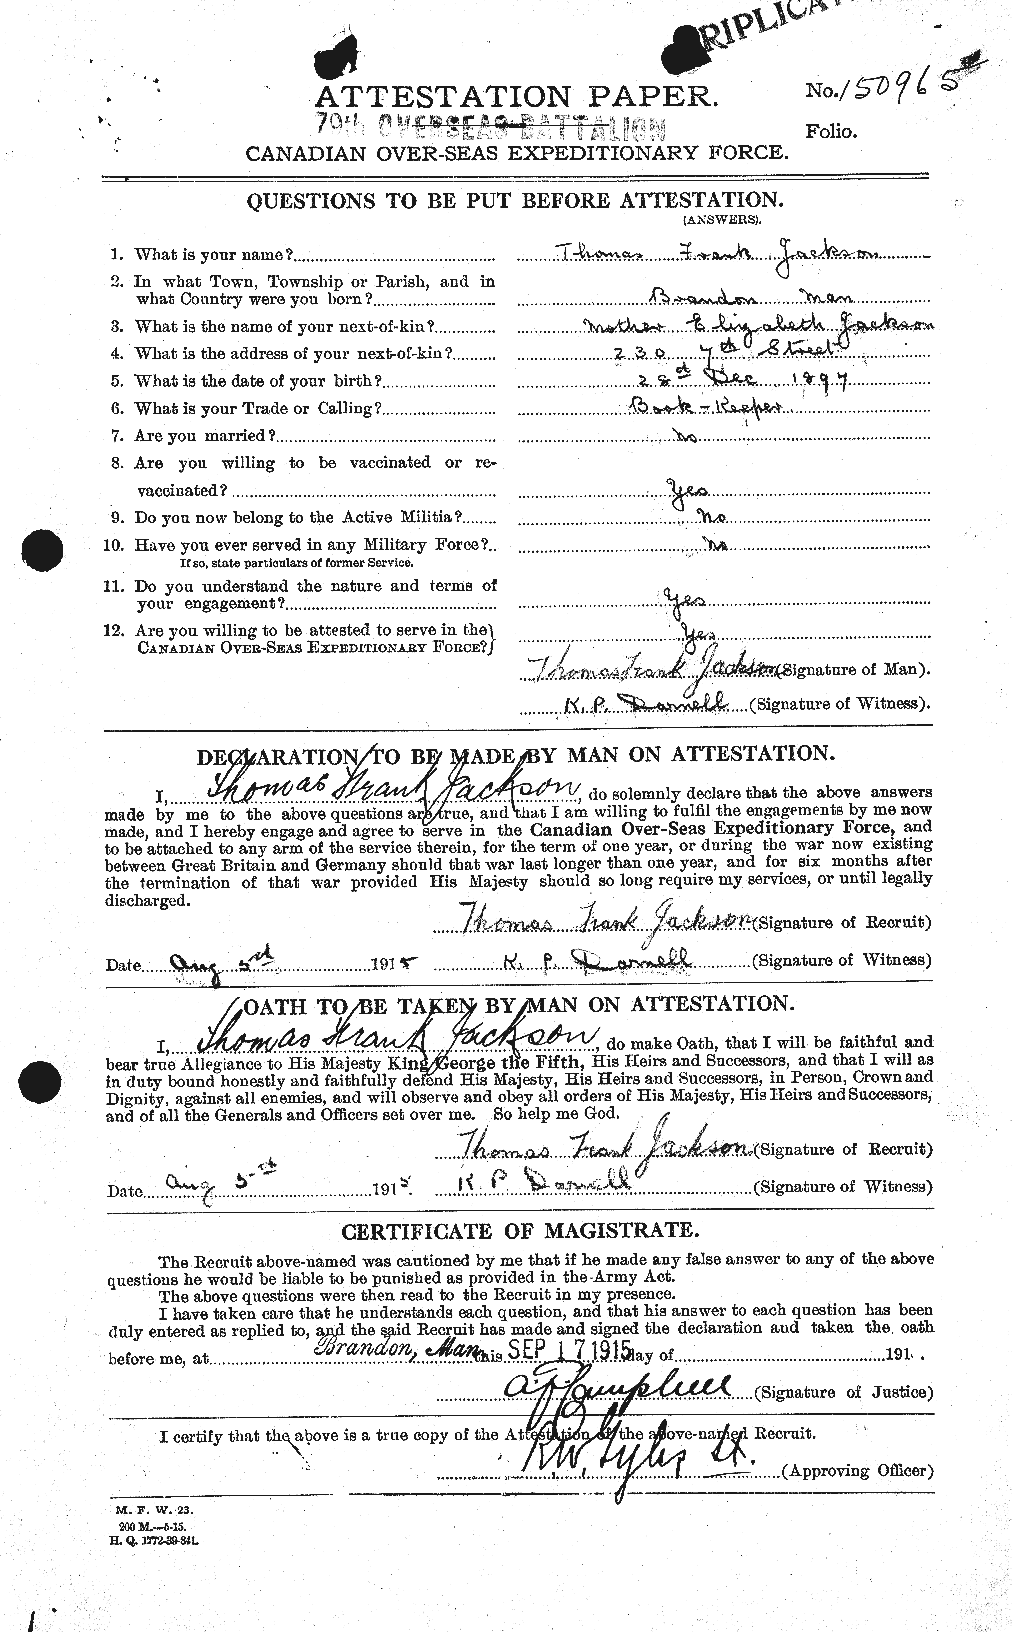 Personnel Records of the First World War - CEF 412326a